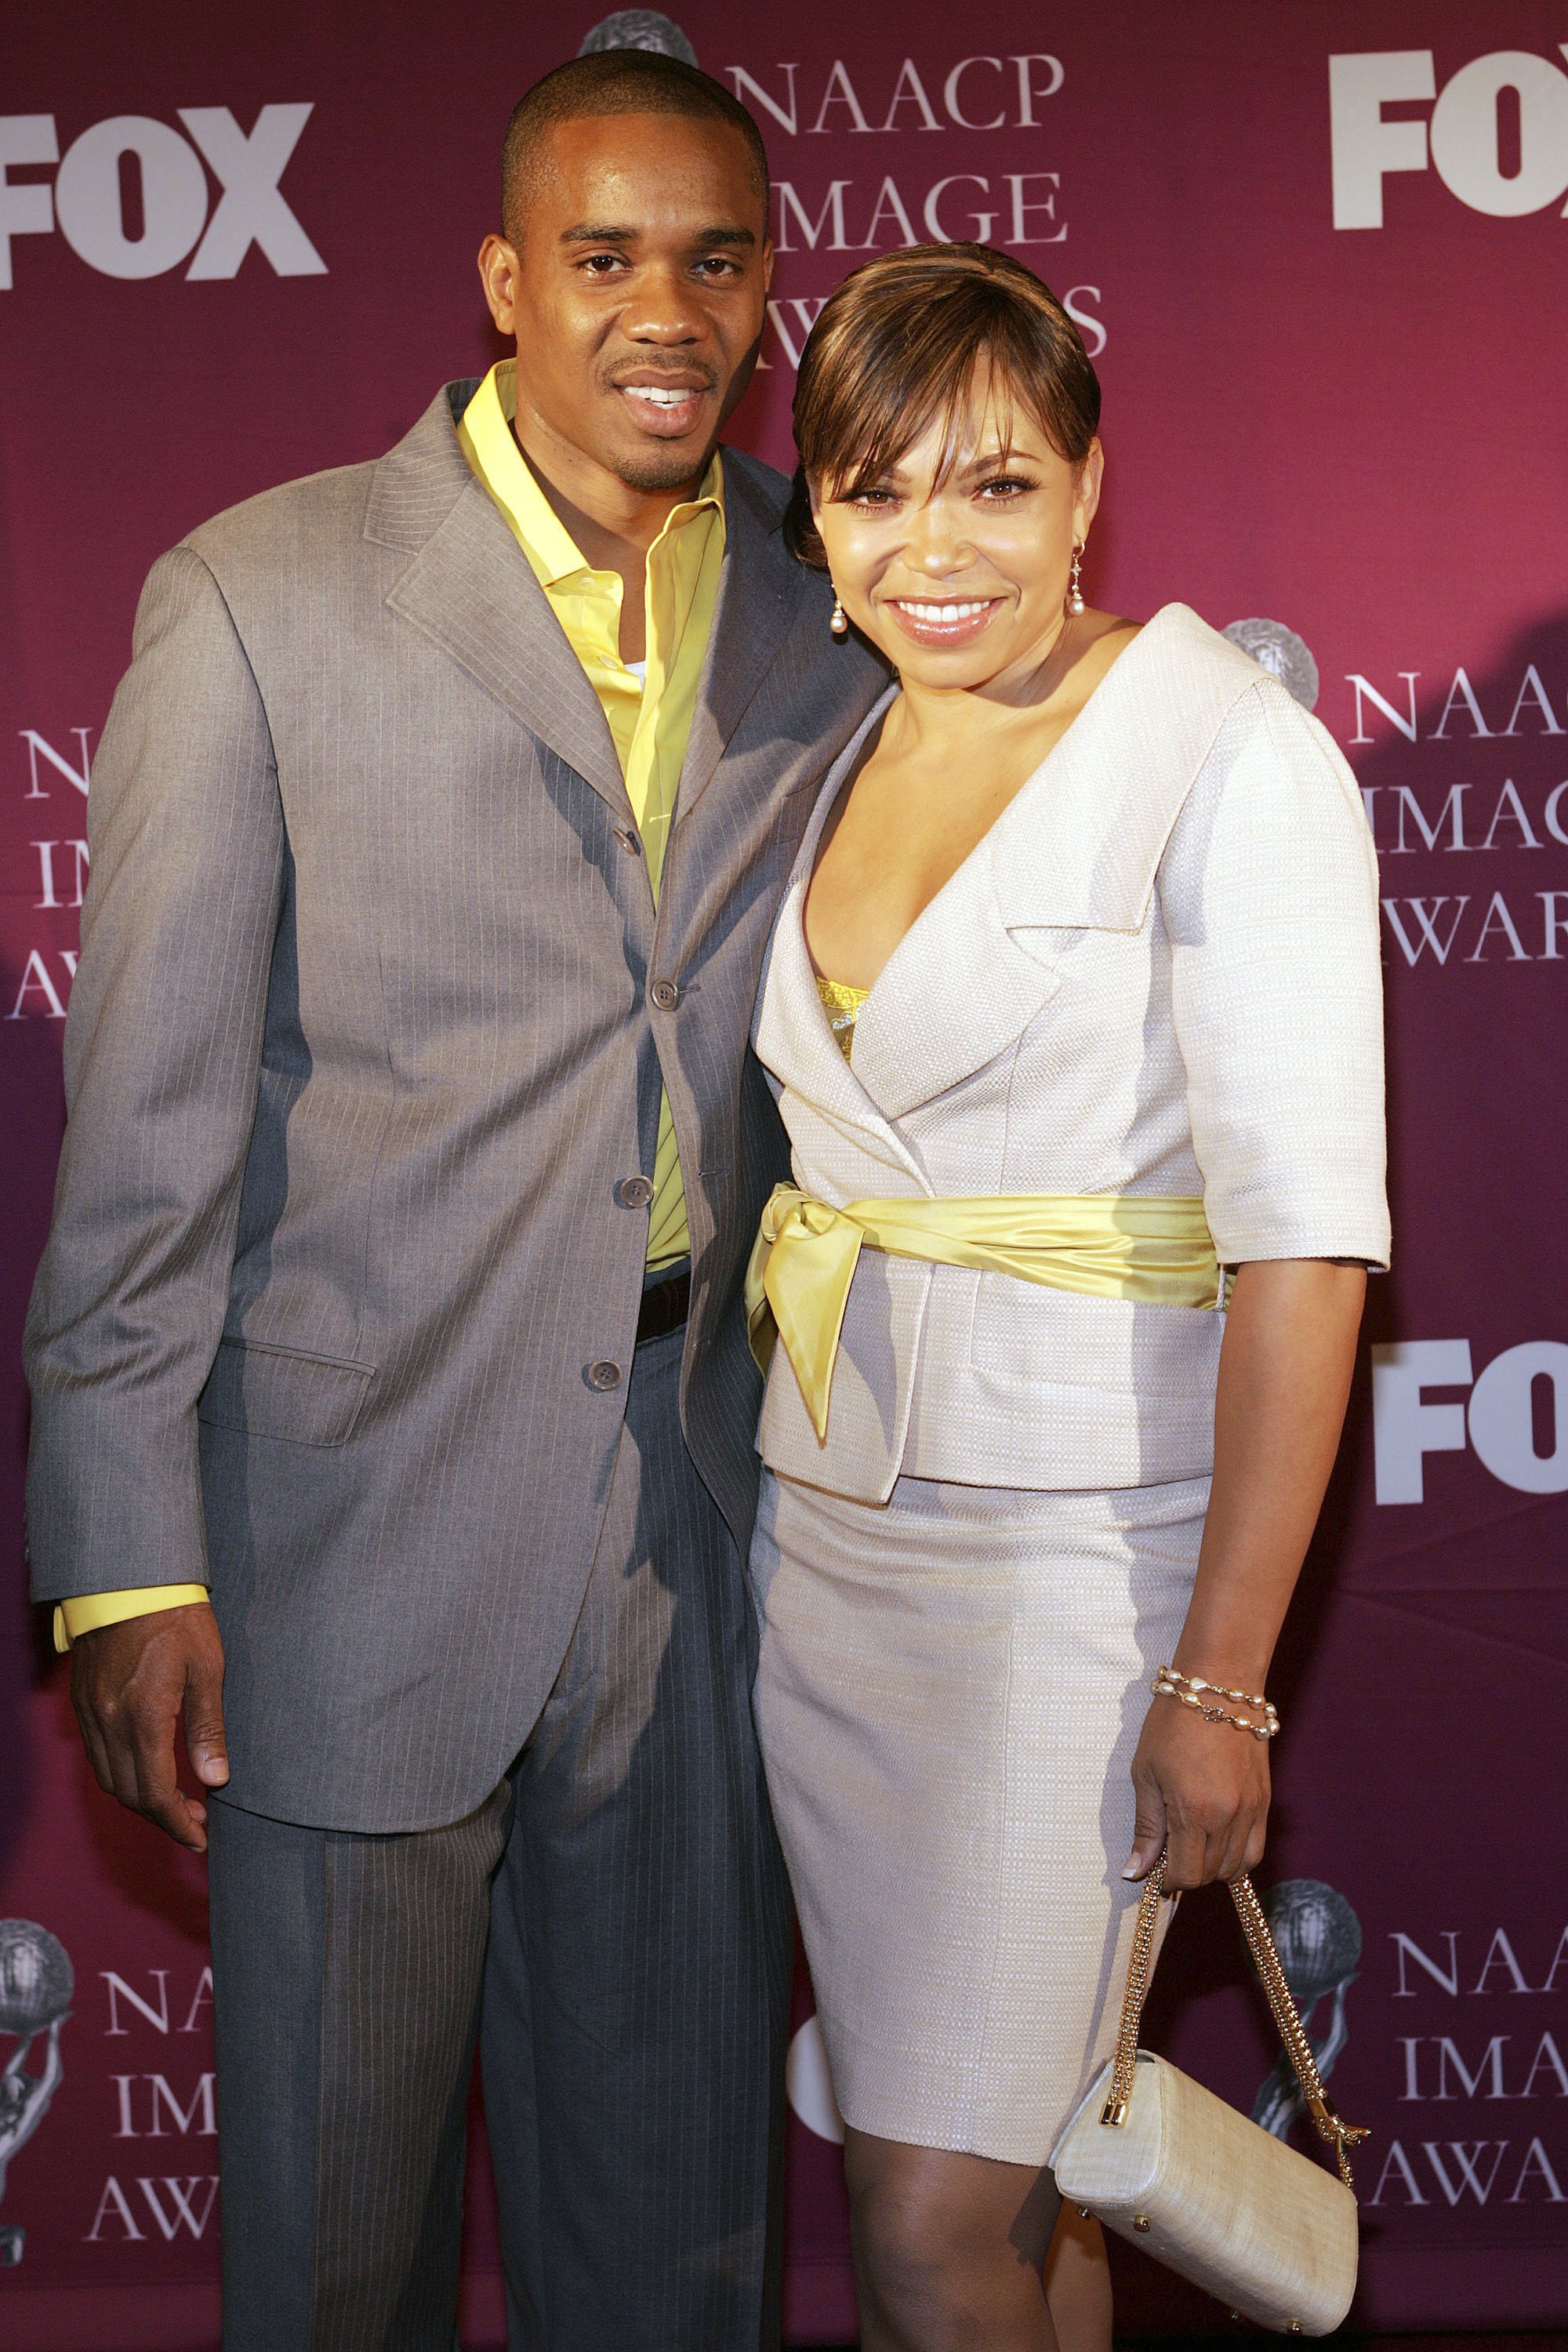 Duane Martin and Tisha Campbell Martin attend the 36th Annual NAACP Image Awards Luncheon at the Beverly Hilton Hotel on March 5, 2005. | Photo: Getty Images